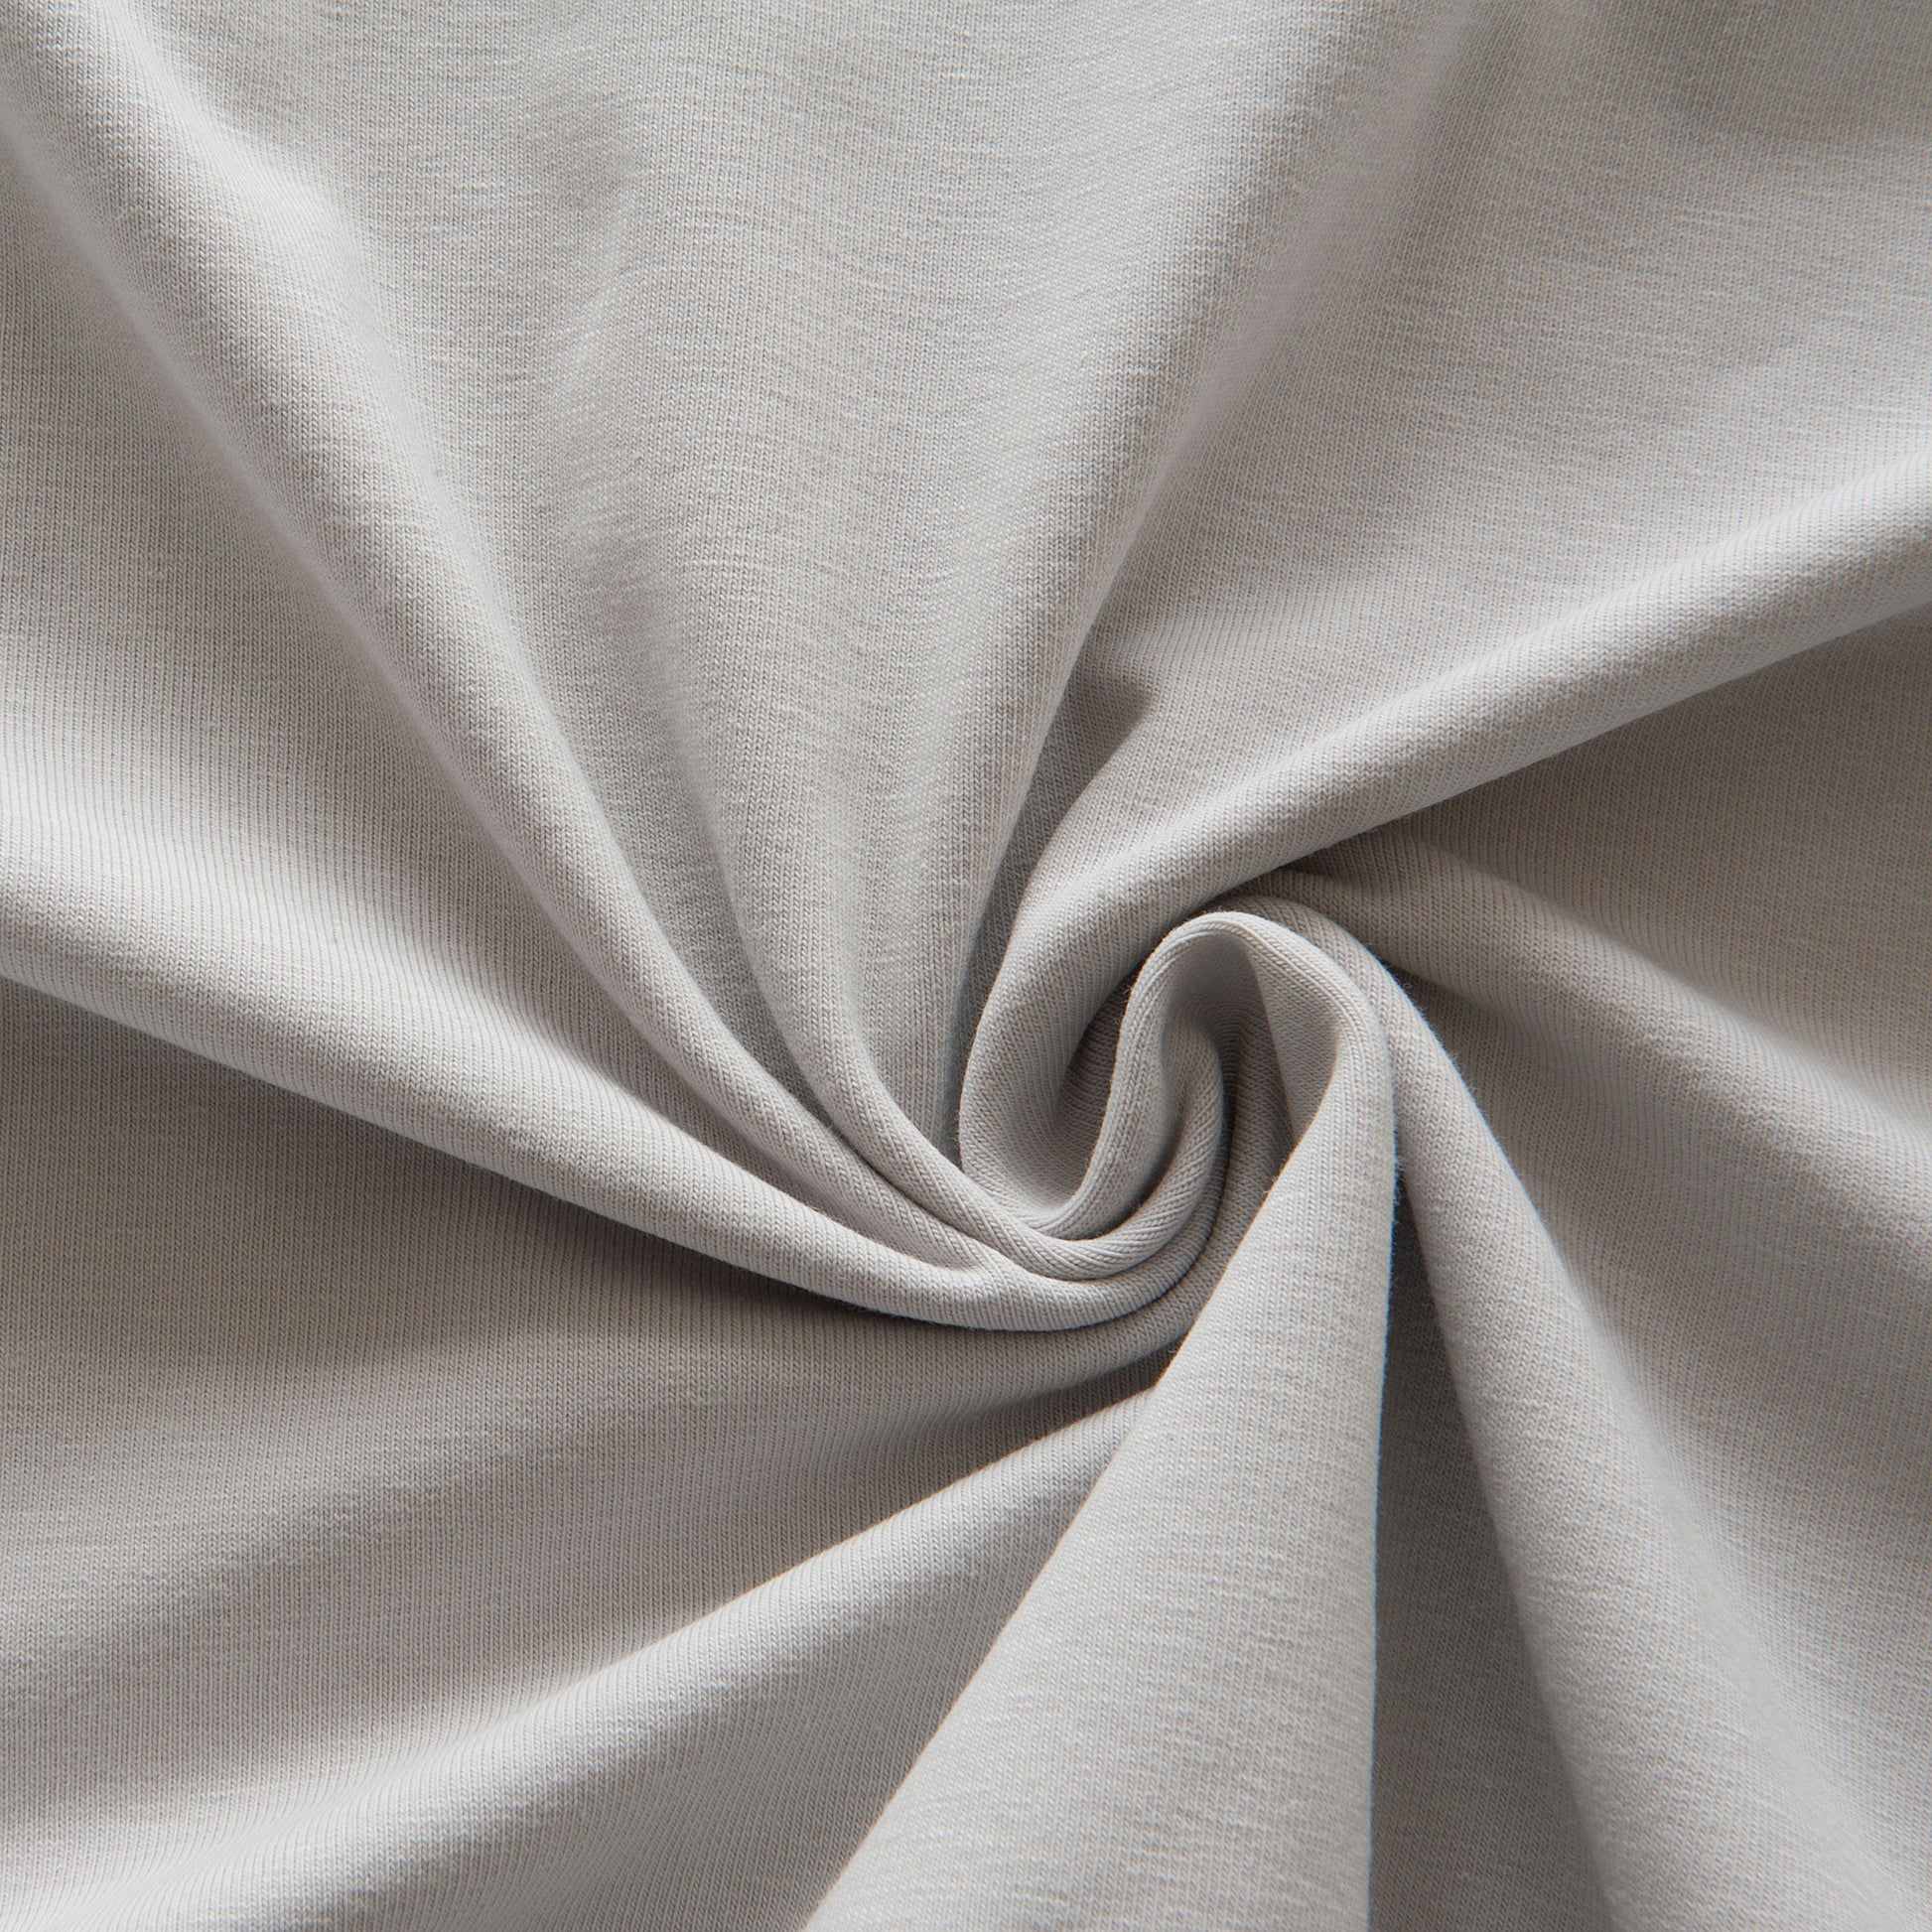 Heather Gray Solid Cotton Spandex Knit Fabric